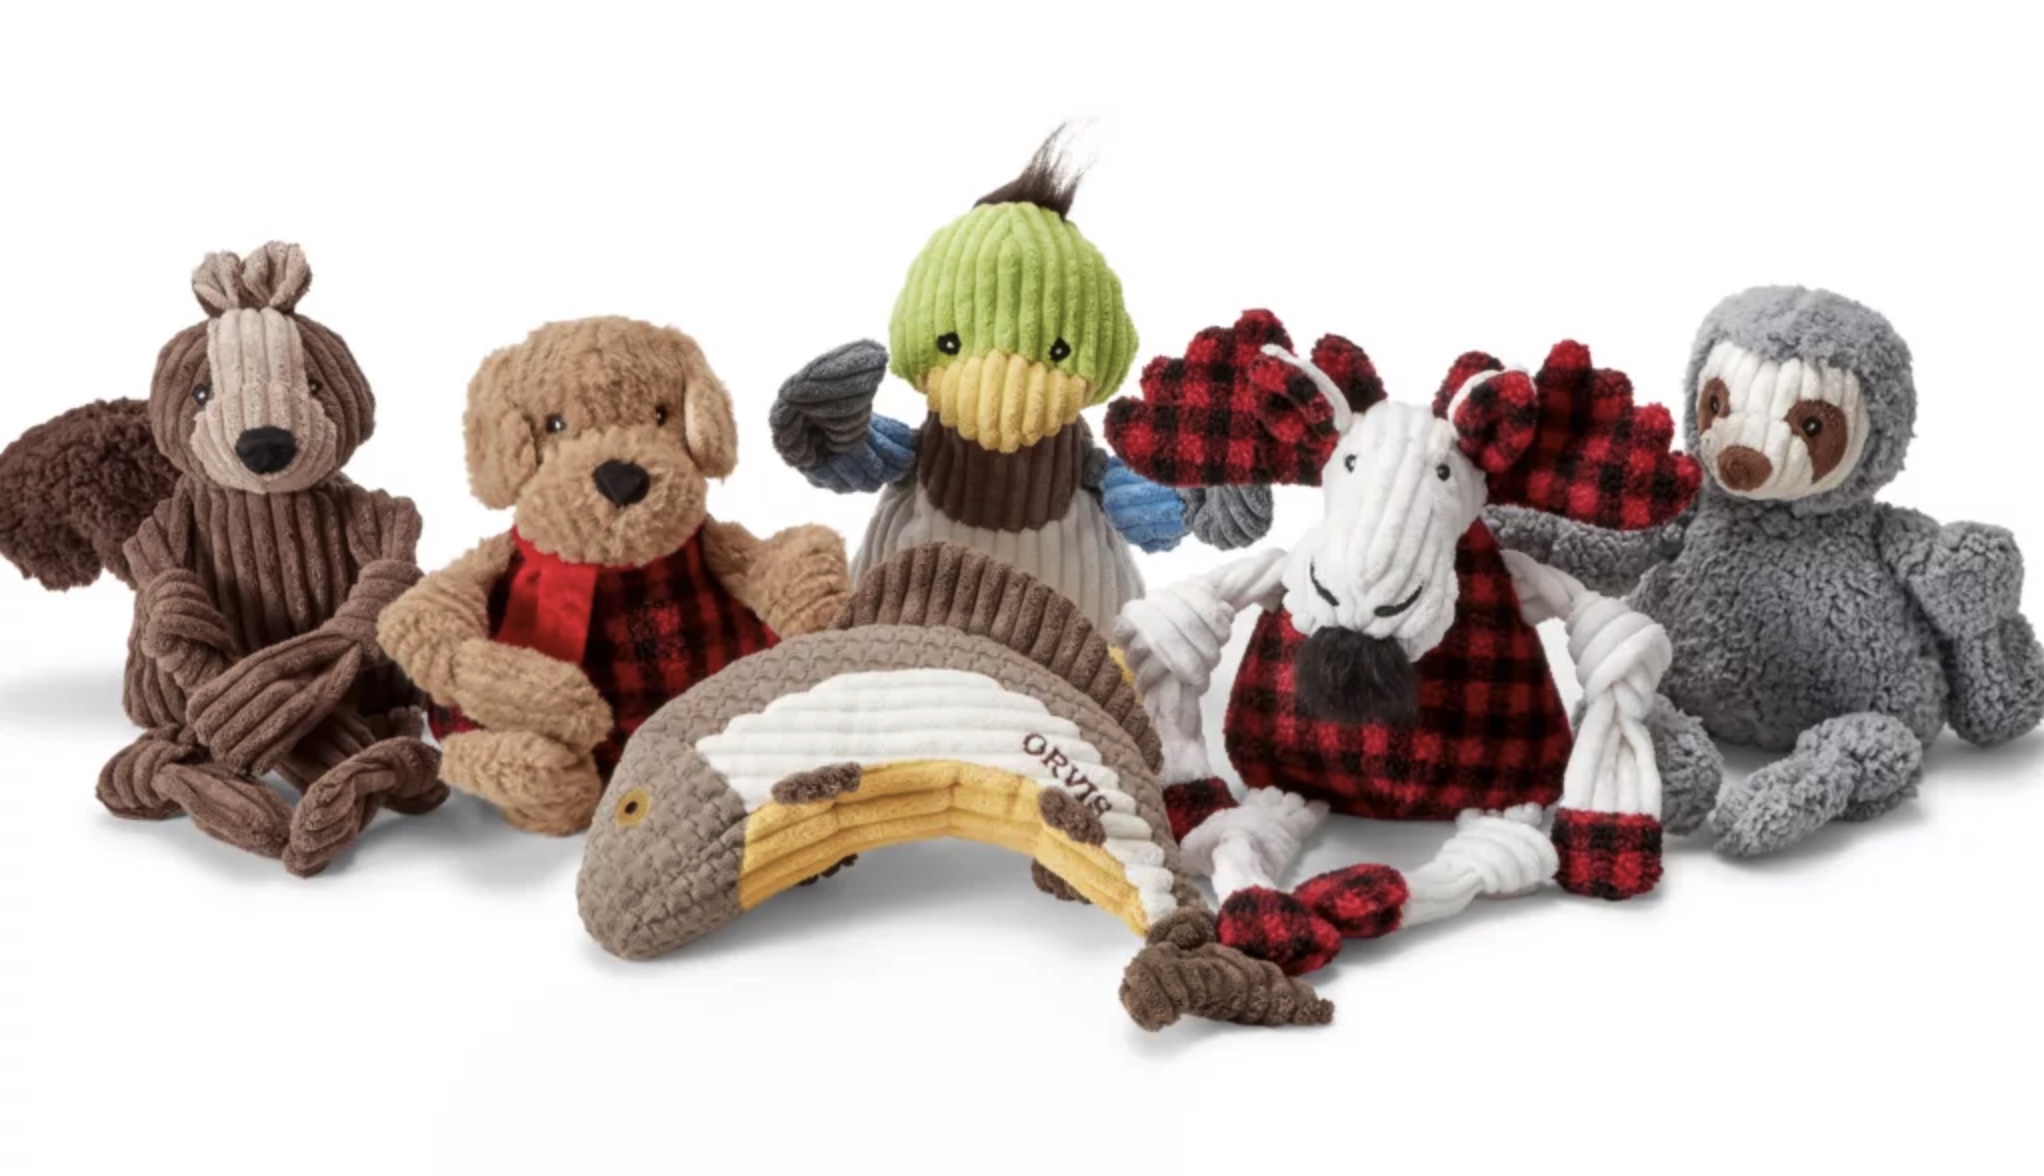 Group of stuffed animals for dogs from Orvis